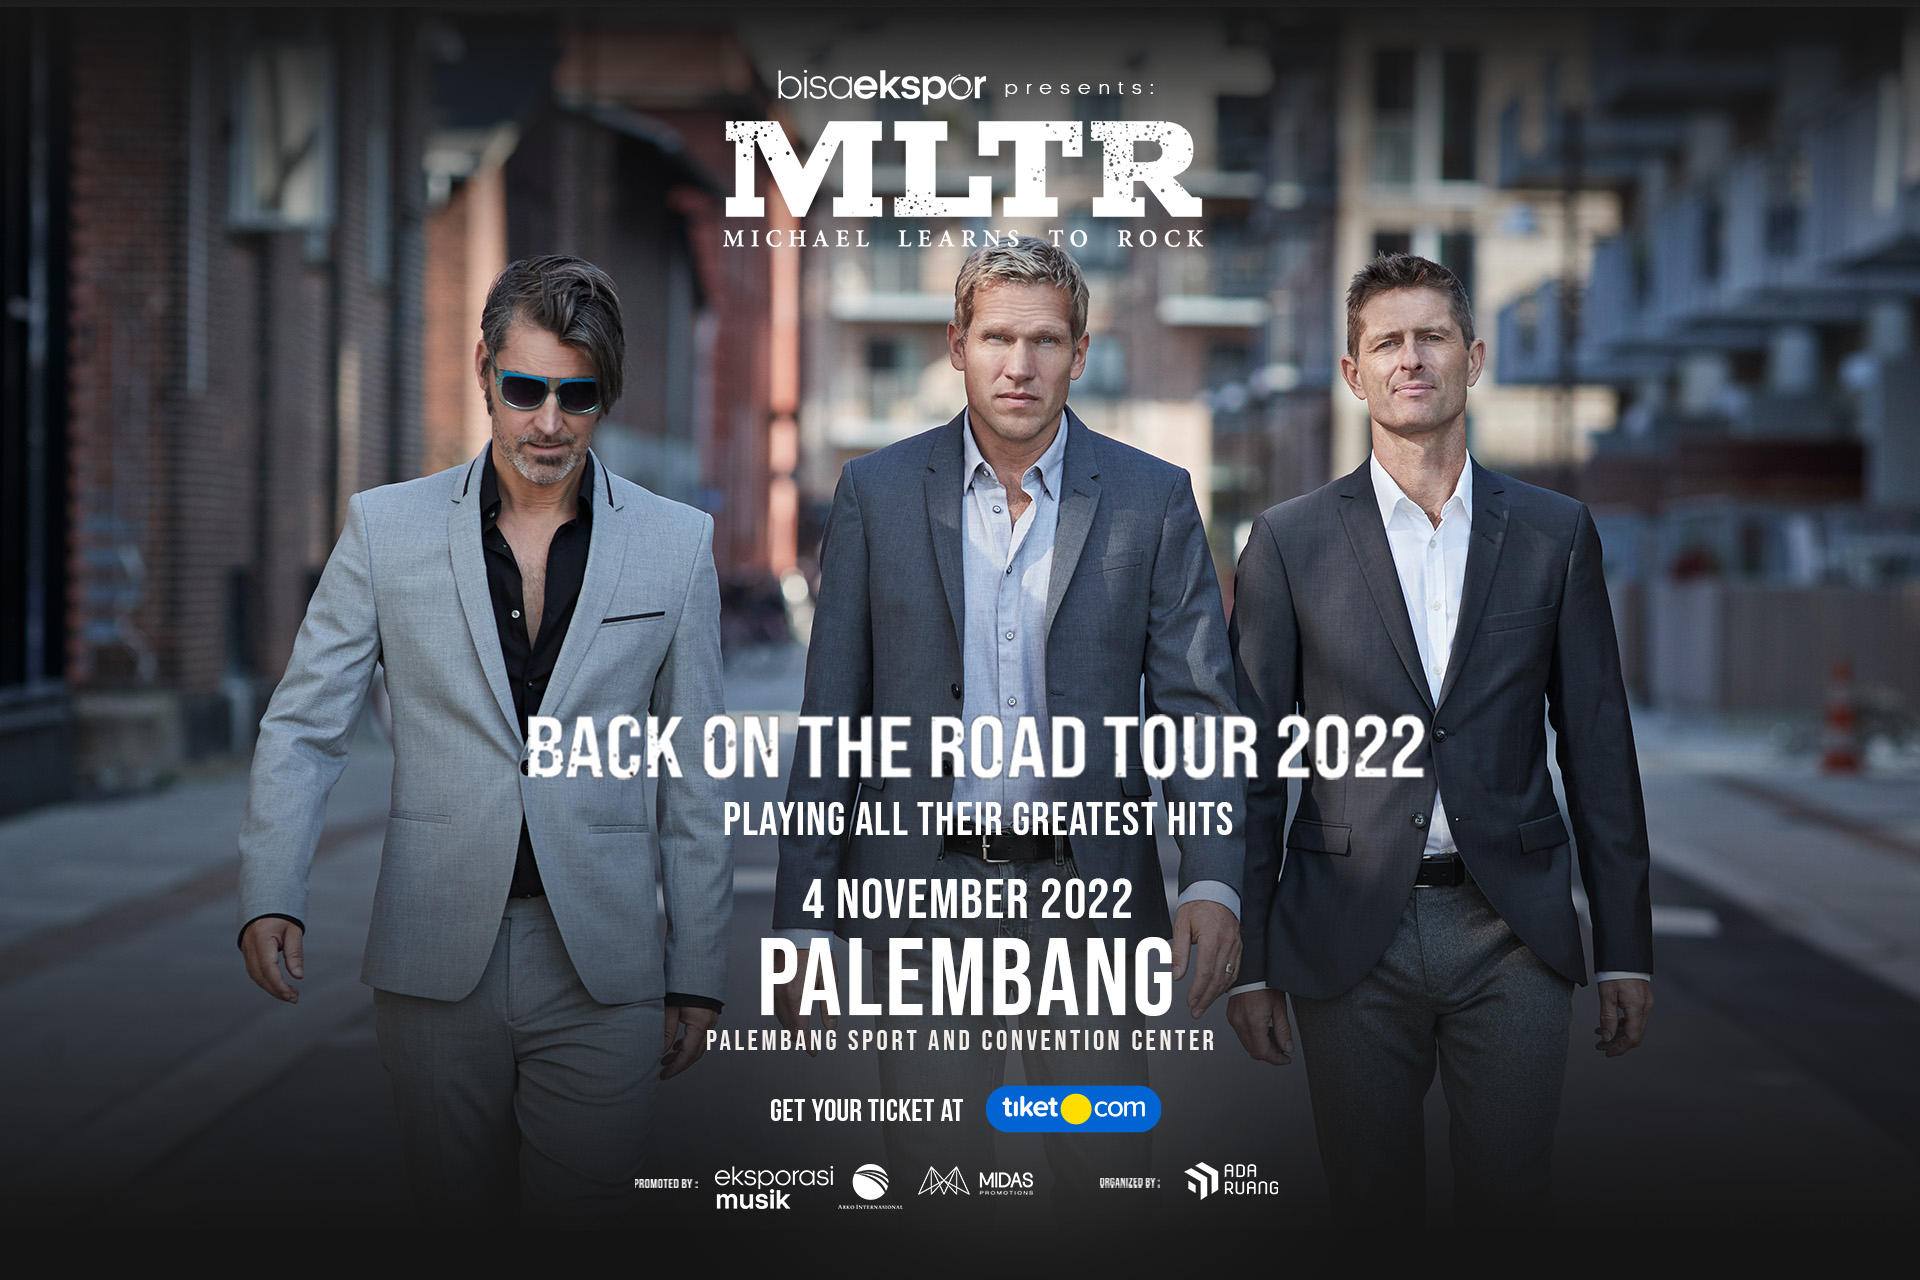 mltr indonesia tour